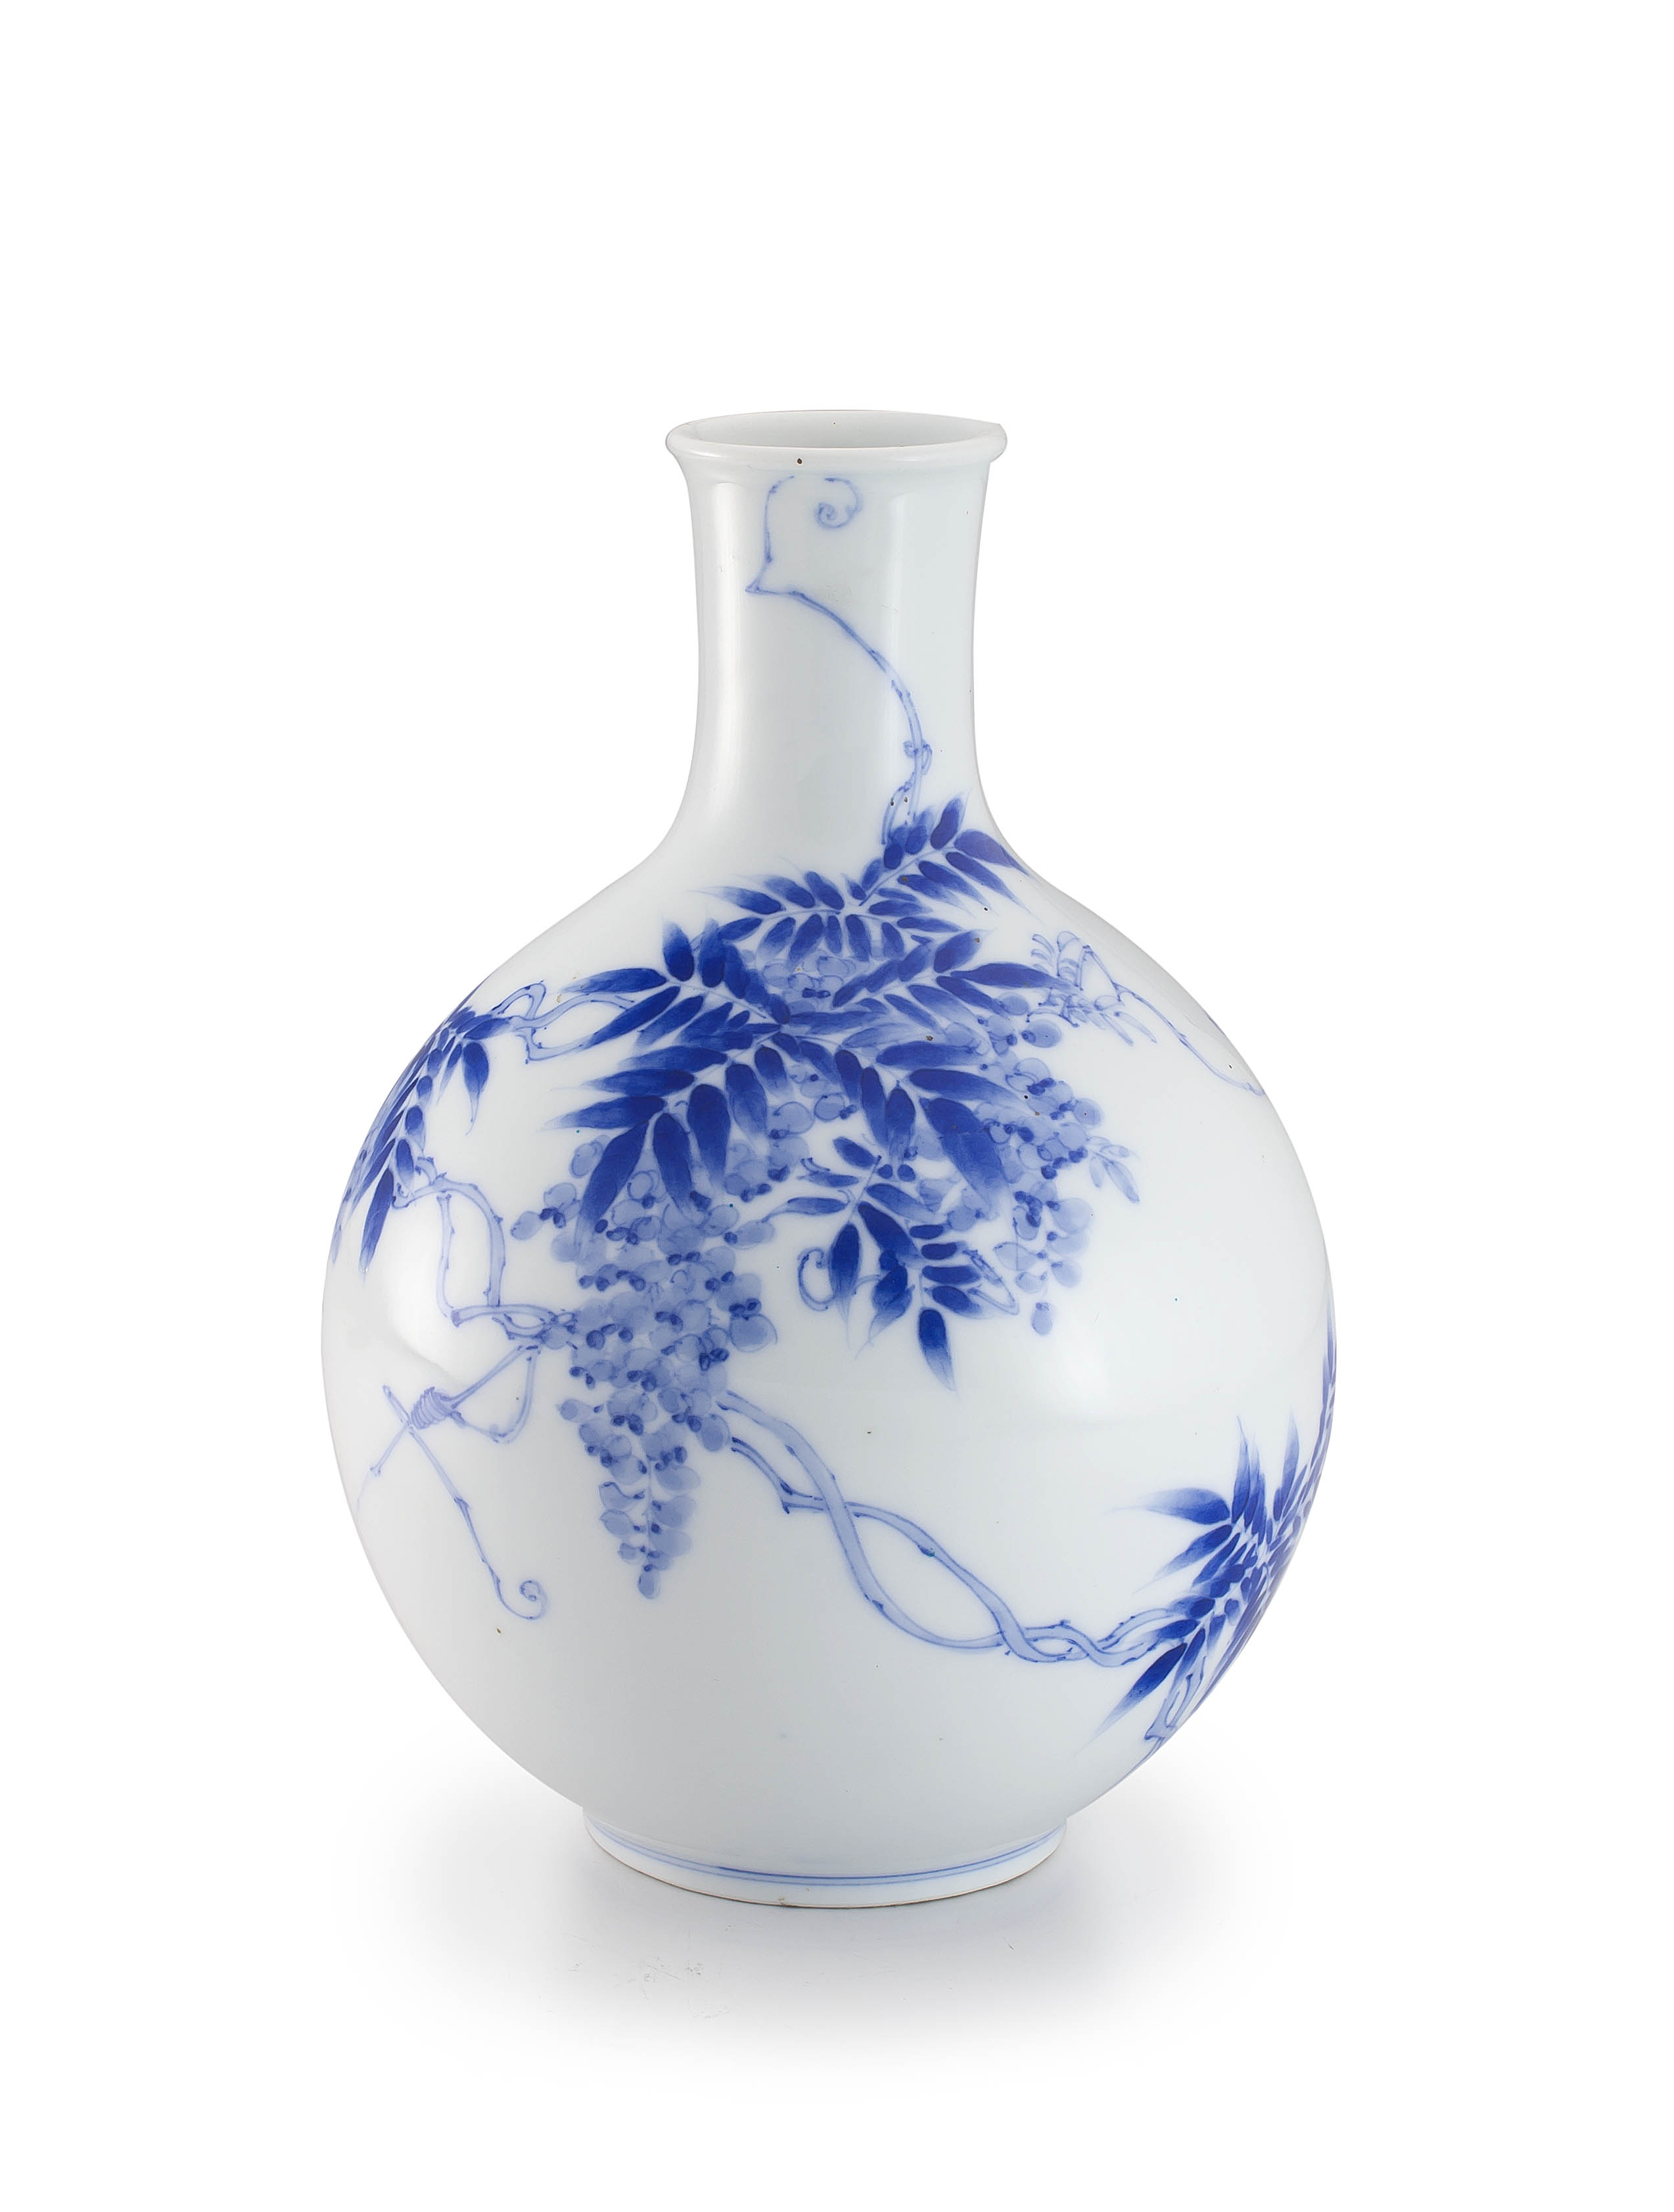 A Japanese blue and white bottle vase, late Meiji period (1868-1912)